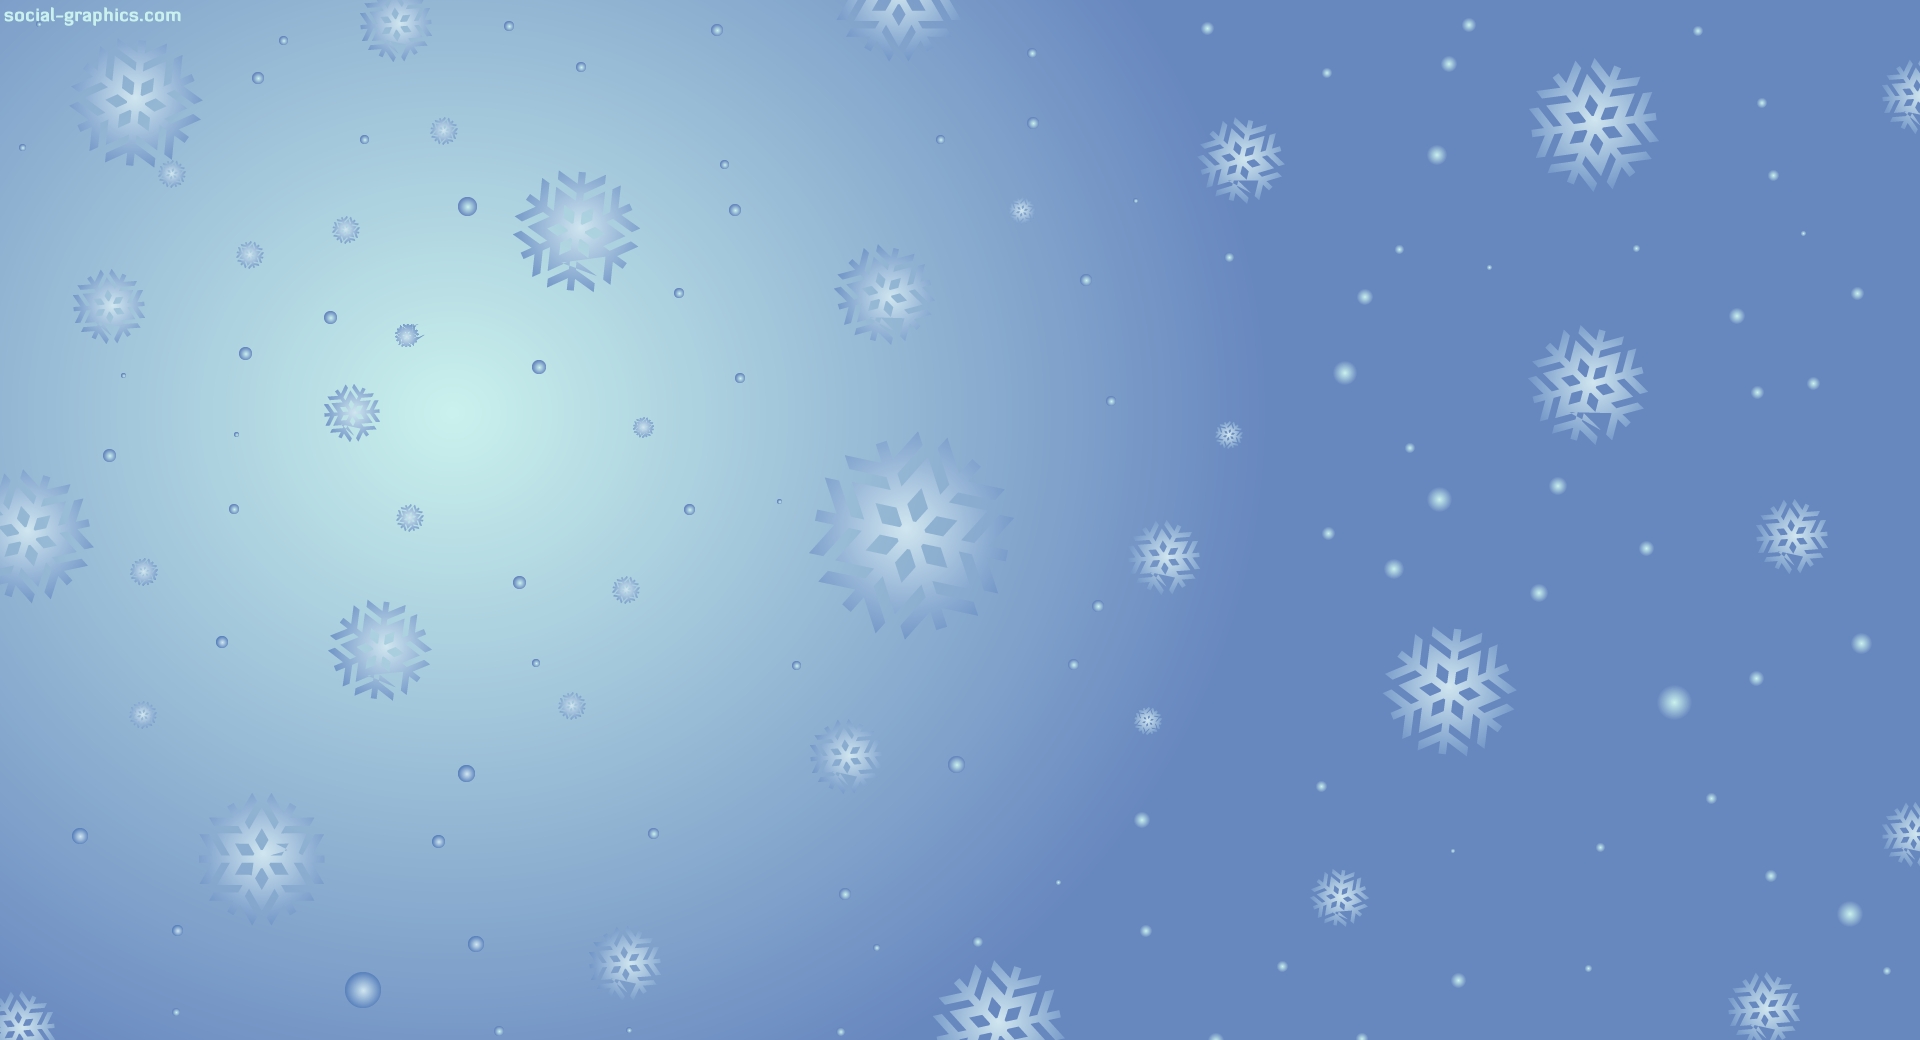 Background Snowy Winter Social Media Graphics